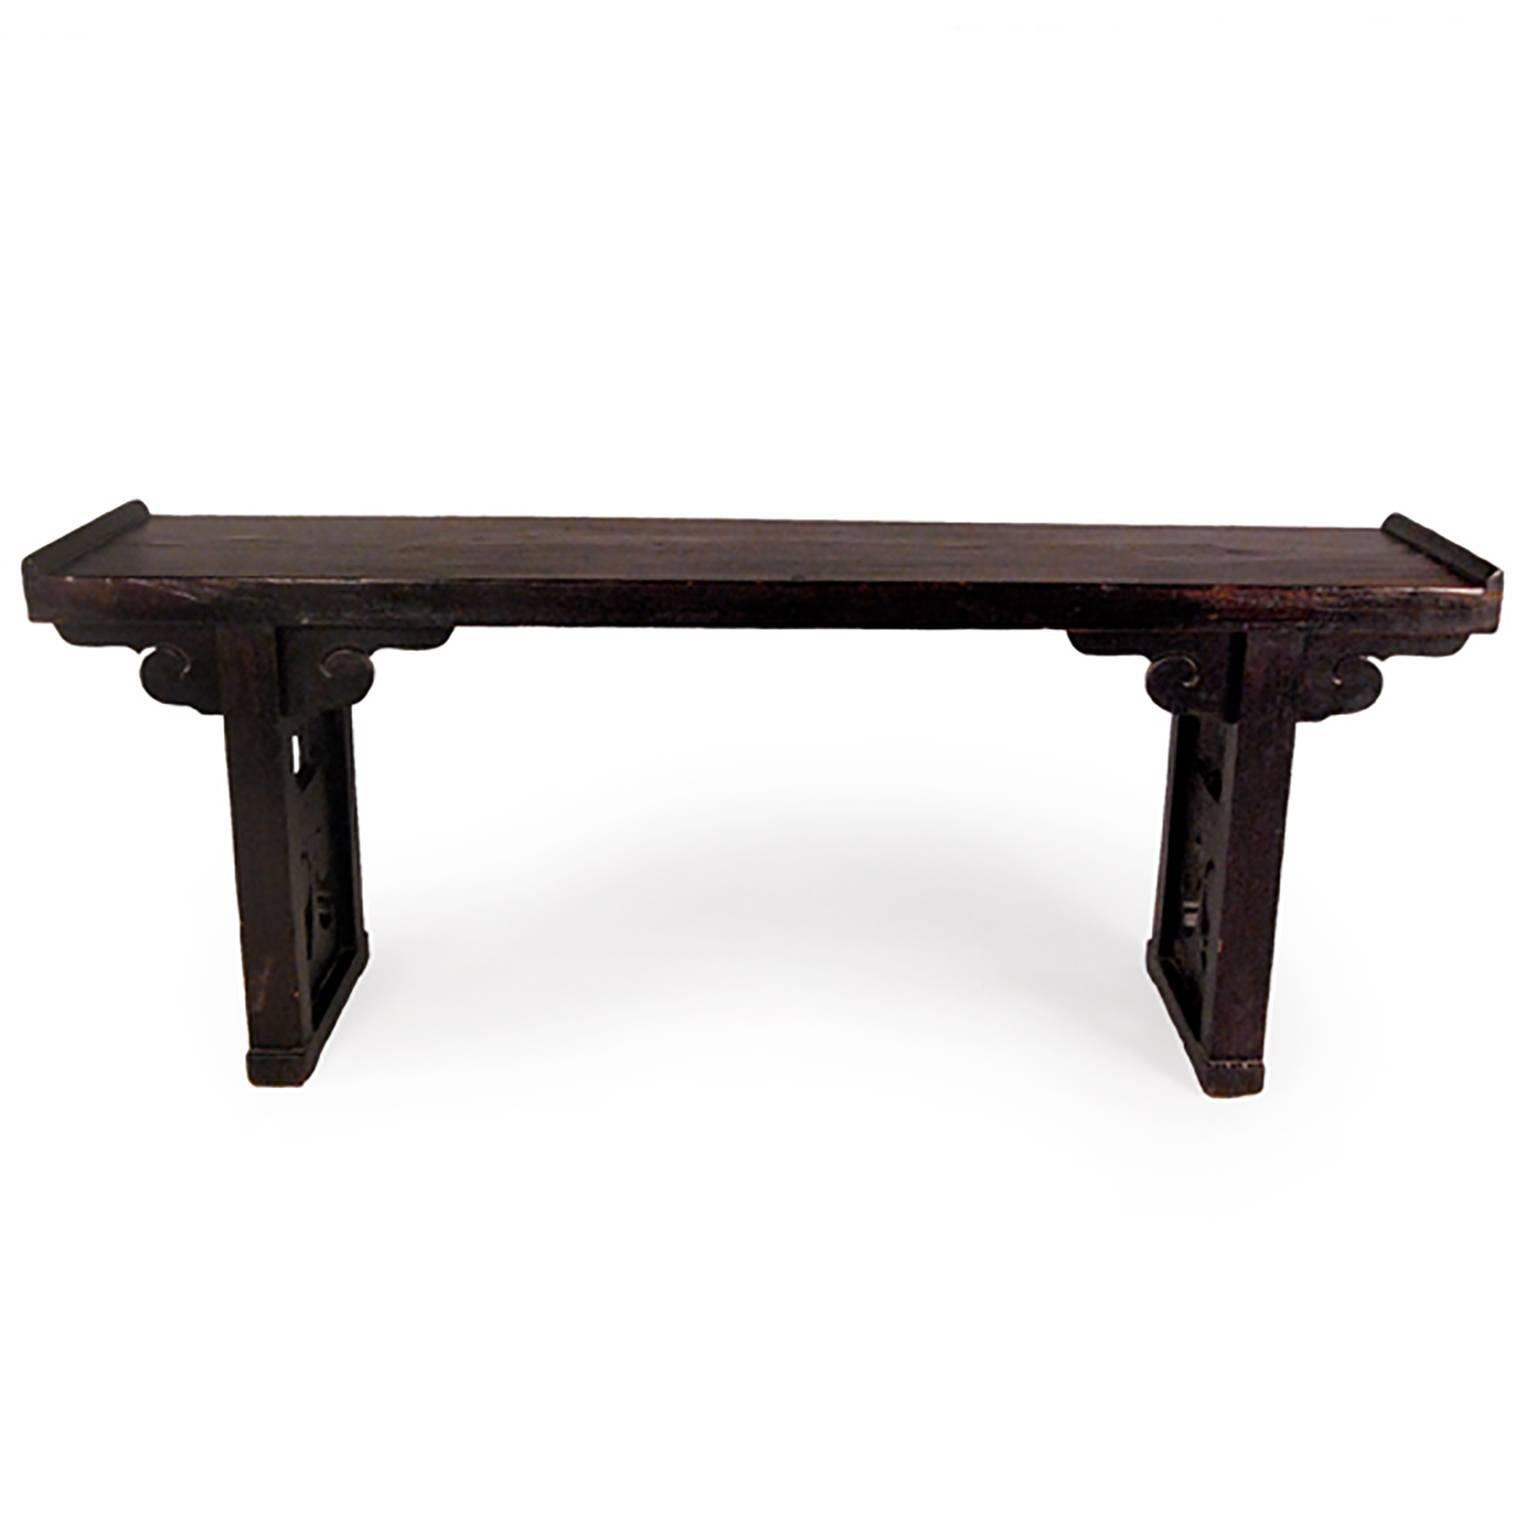 A century and a half ago this unique table may have been used as a familys altar. It was made in China’s Shanxi Province: the spandrels and leg panels are carved to look like ruyi, and the top is made from a solid piece of elmwood. Ruyi are a type